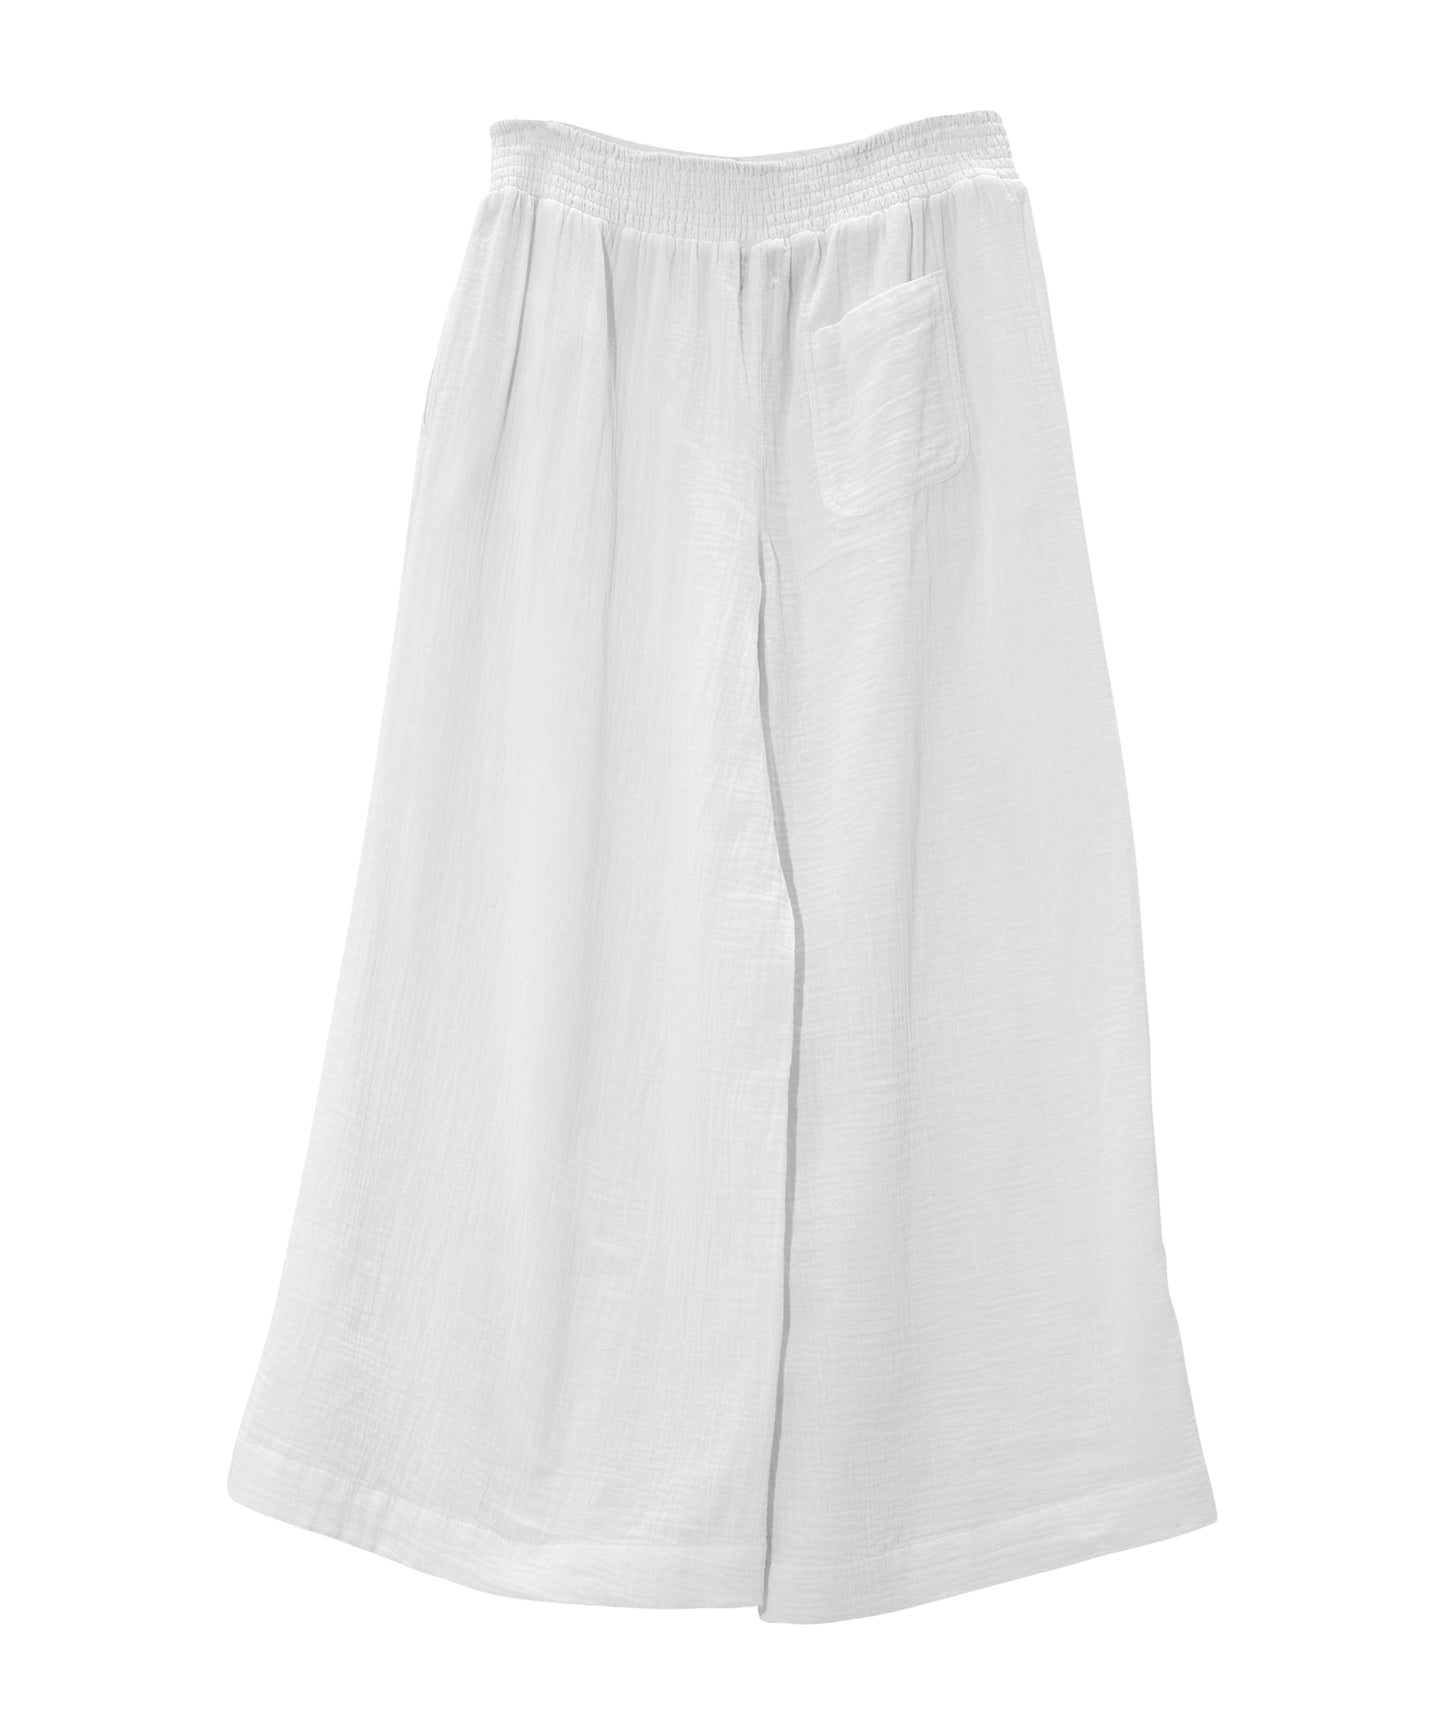 Supersoft Gauze Smocked Pants in color white - back of pants